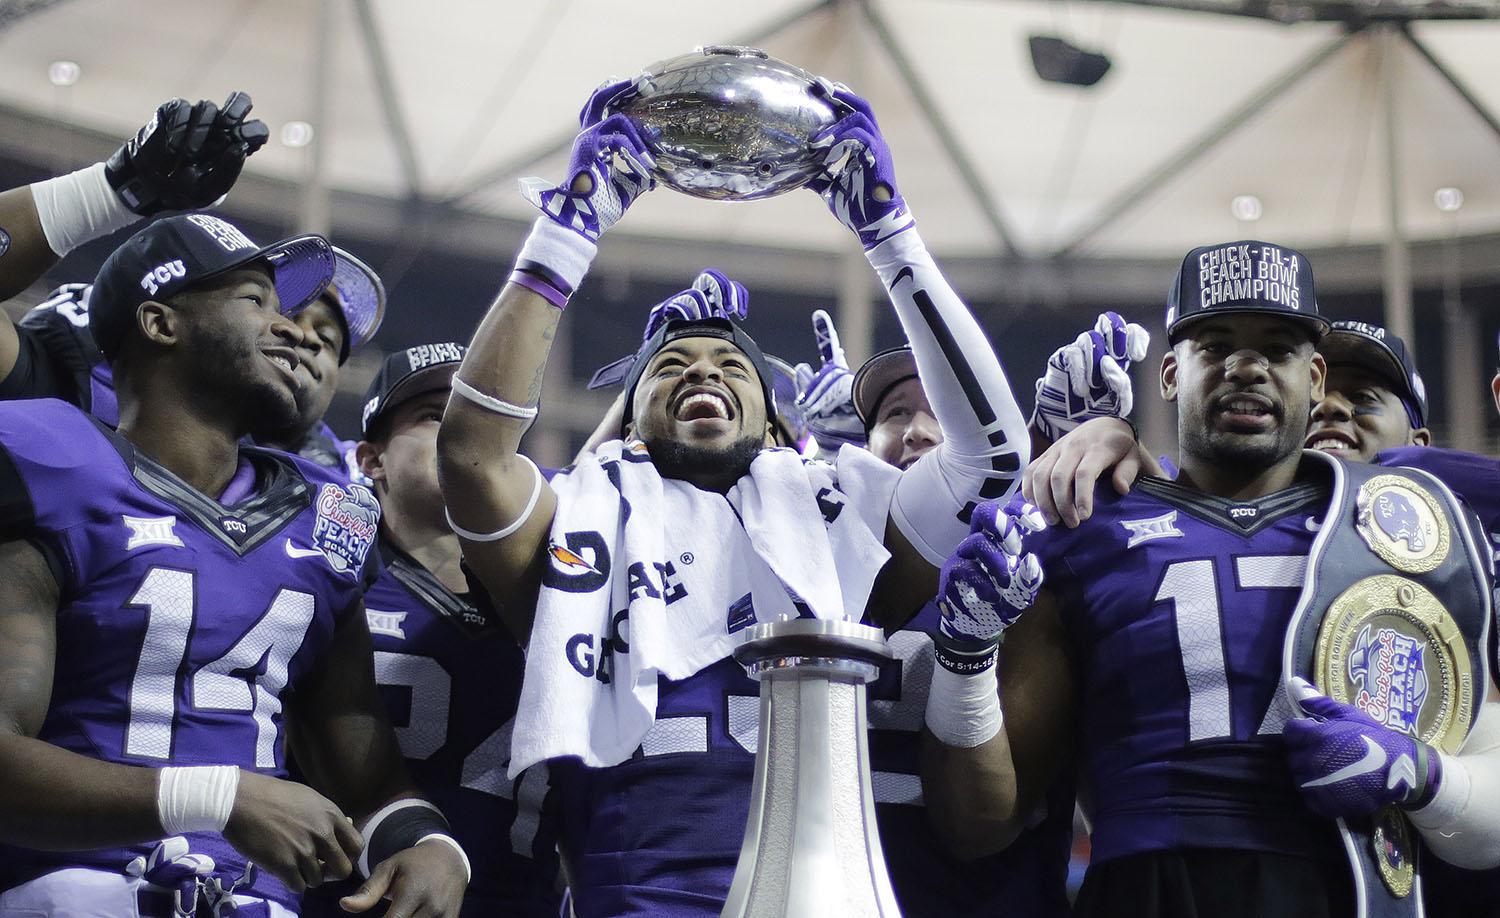 TCU safety Michael Downing holds part of the Peach Bowl trophy after the second half of the Peach Bowl NCAA football game against Mississippi, Wednesday, Dec. 31, 2014, in Atlanta. TCU won 42-3. (AP Photo/David Goldman)